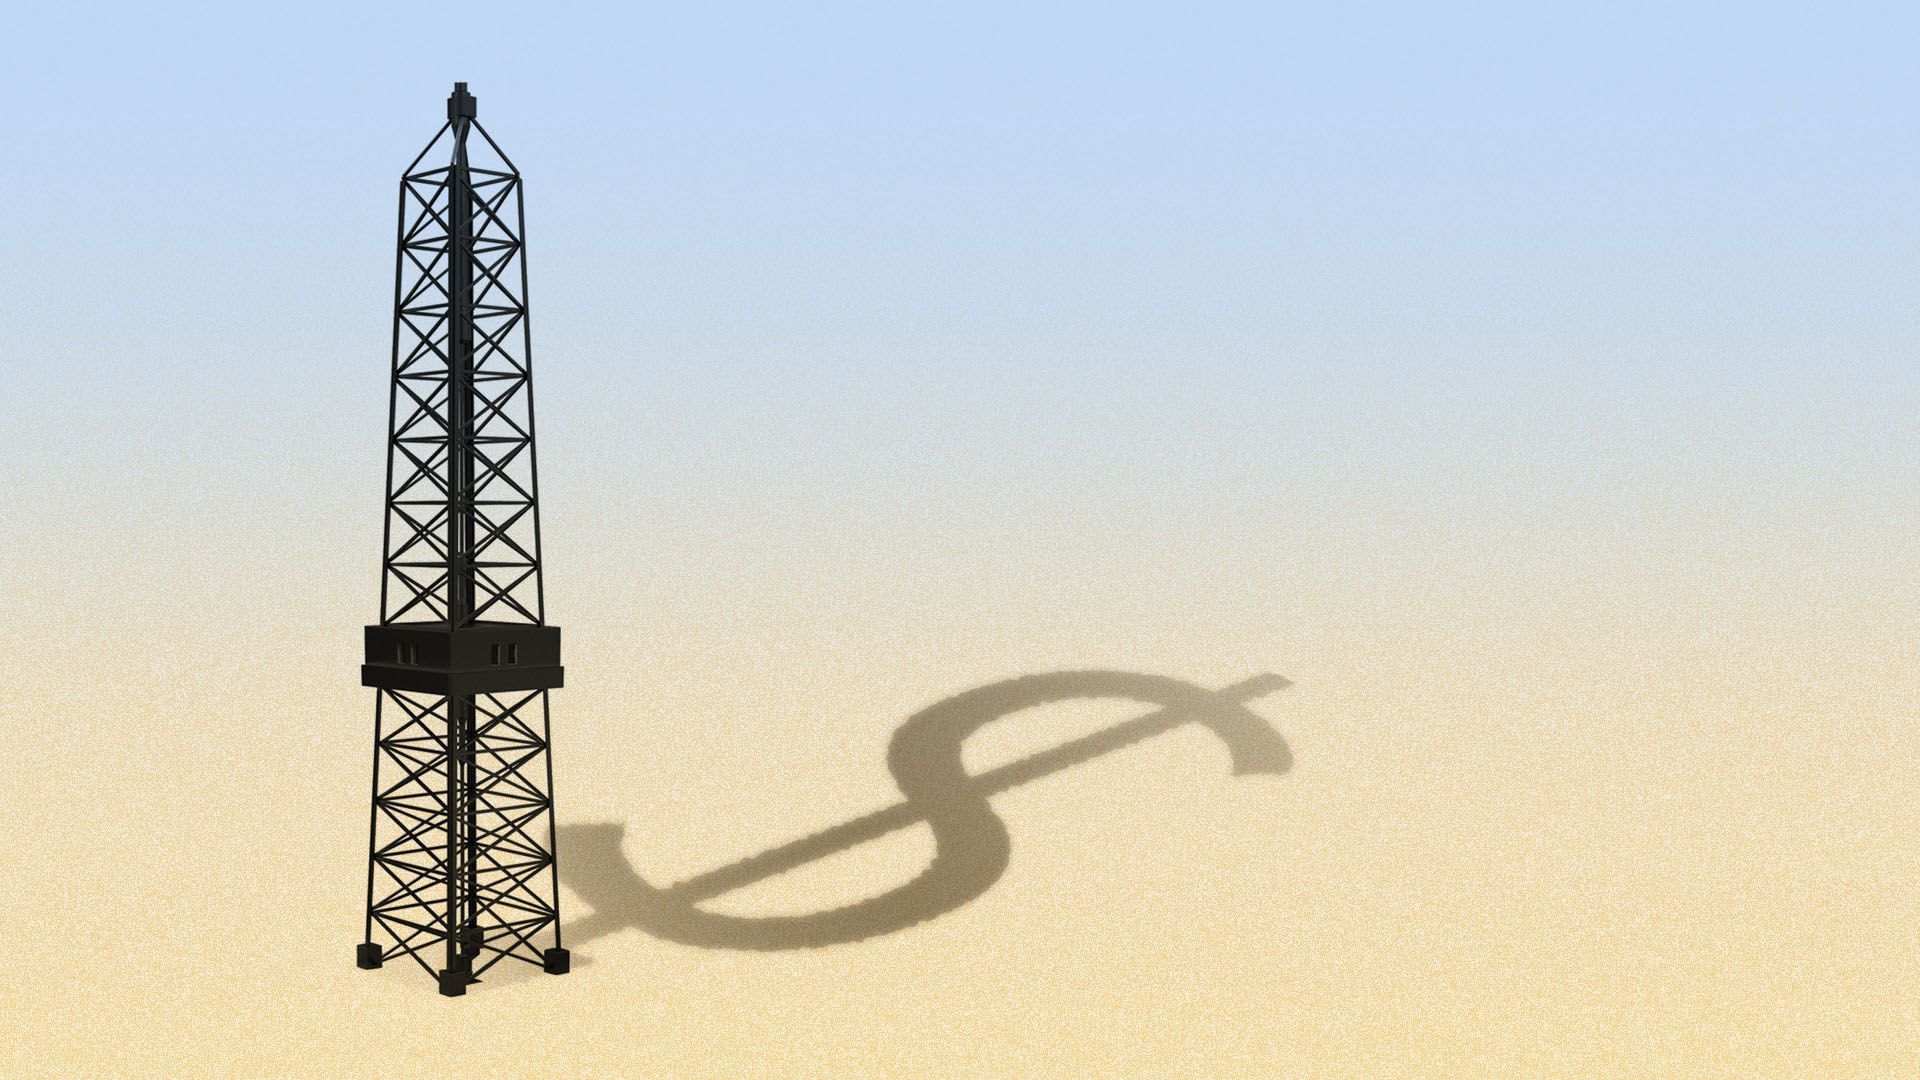 Illustration of an electrical tower casting a dollar sign as a shadow.